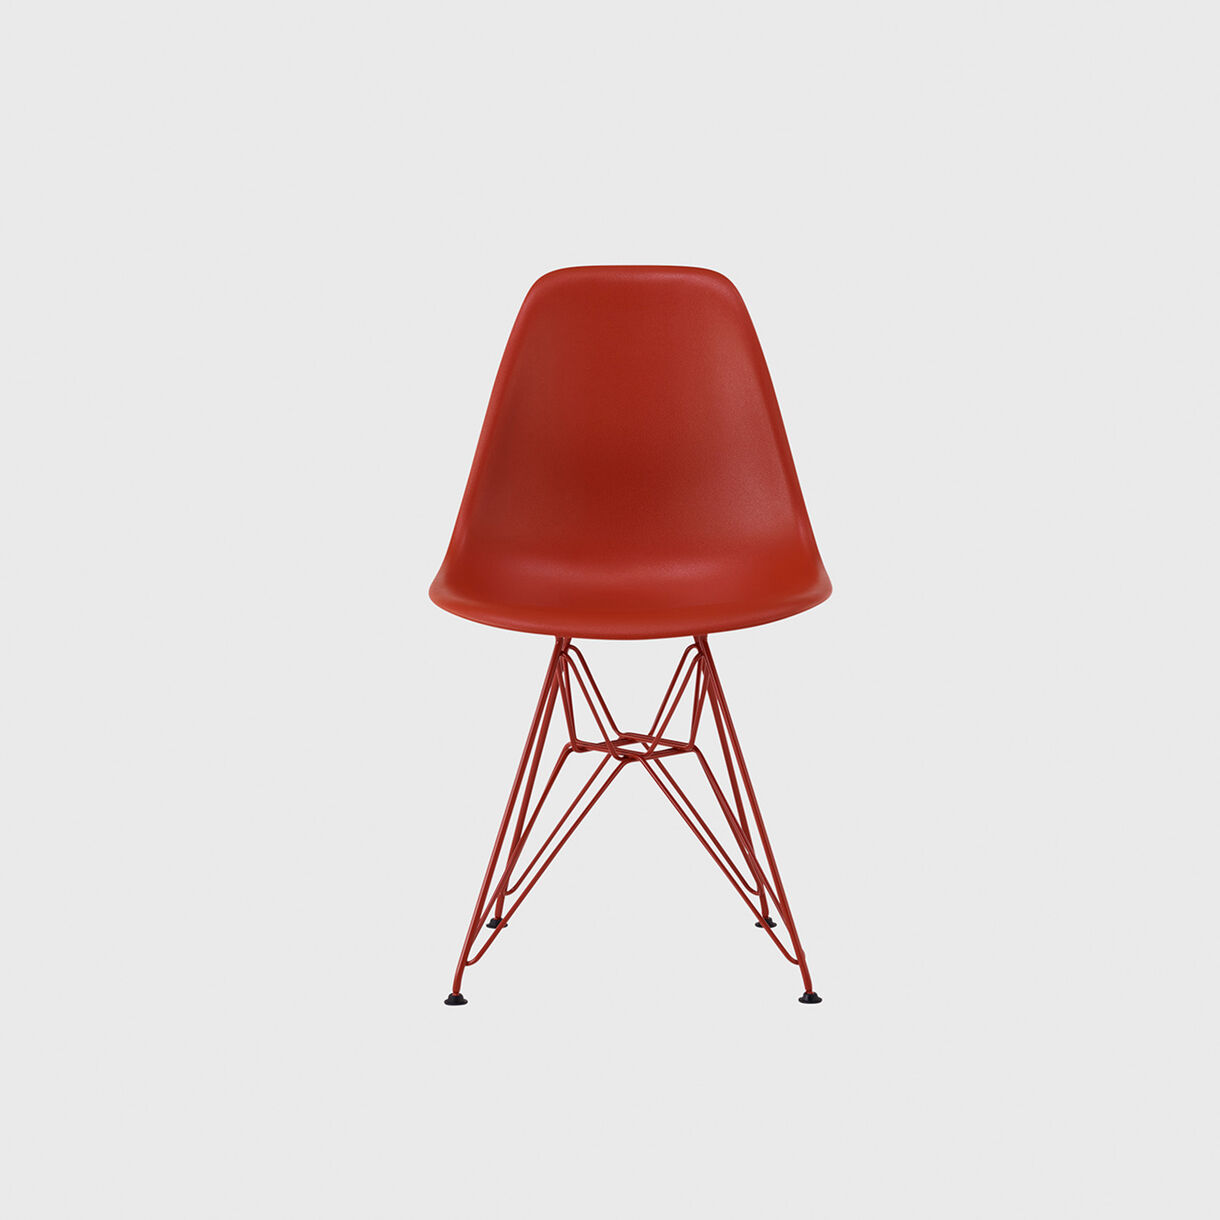 HM x Hay Eames Moulded Plastic Side Chair, Wire Base, Iron Red